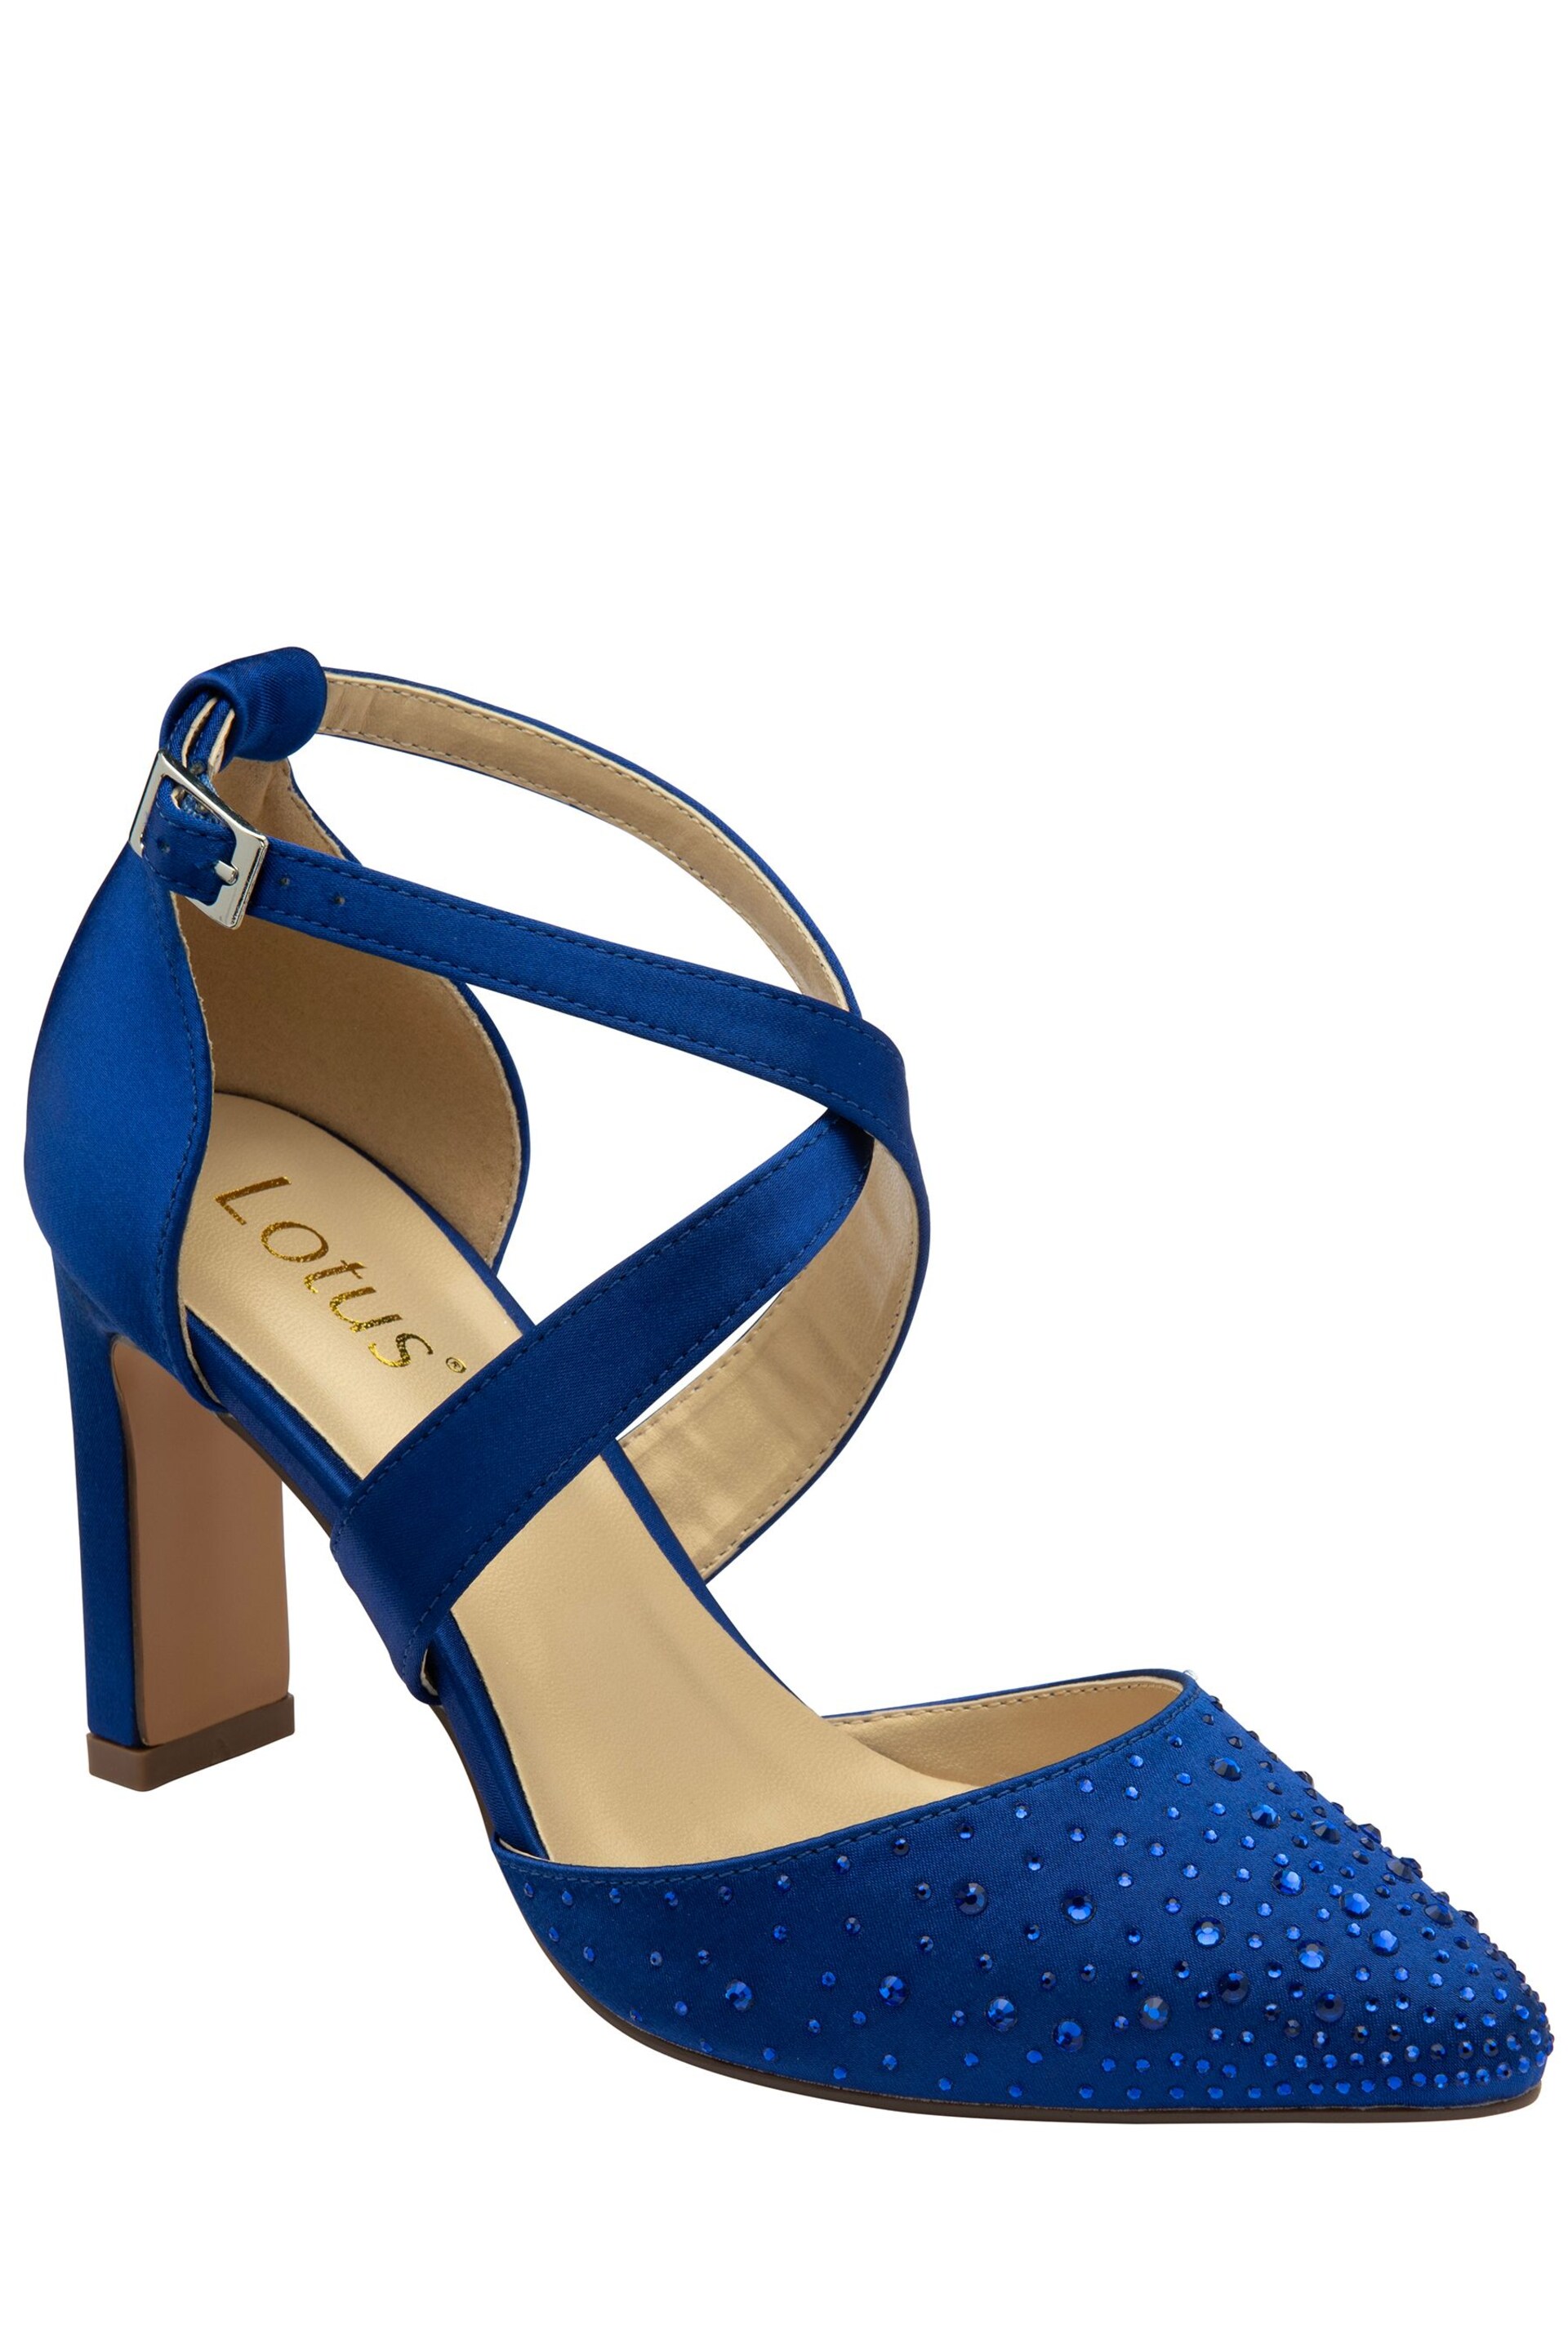 Lotus Blue Diamante Pointed-Toe Court Shoes - Image 1 of 4